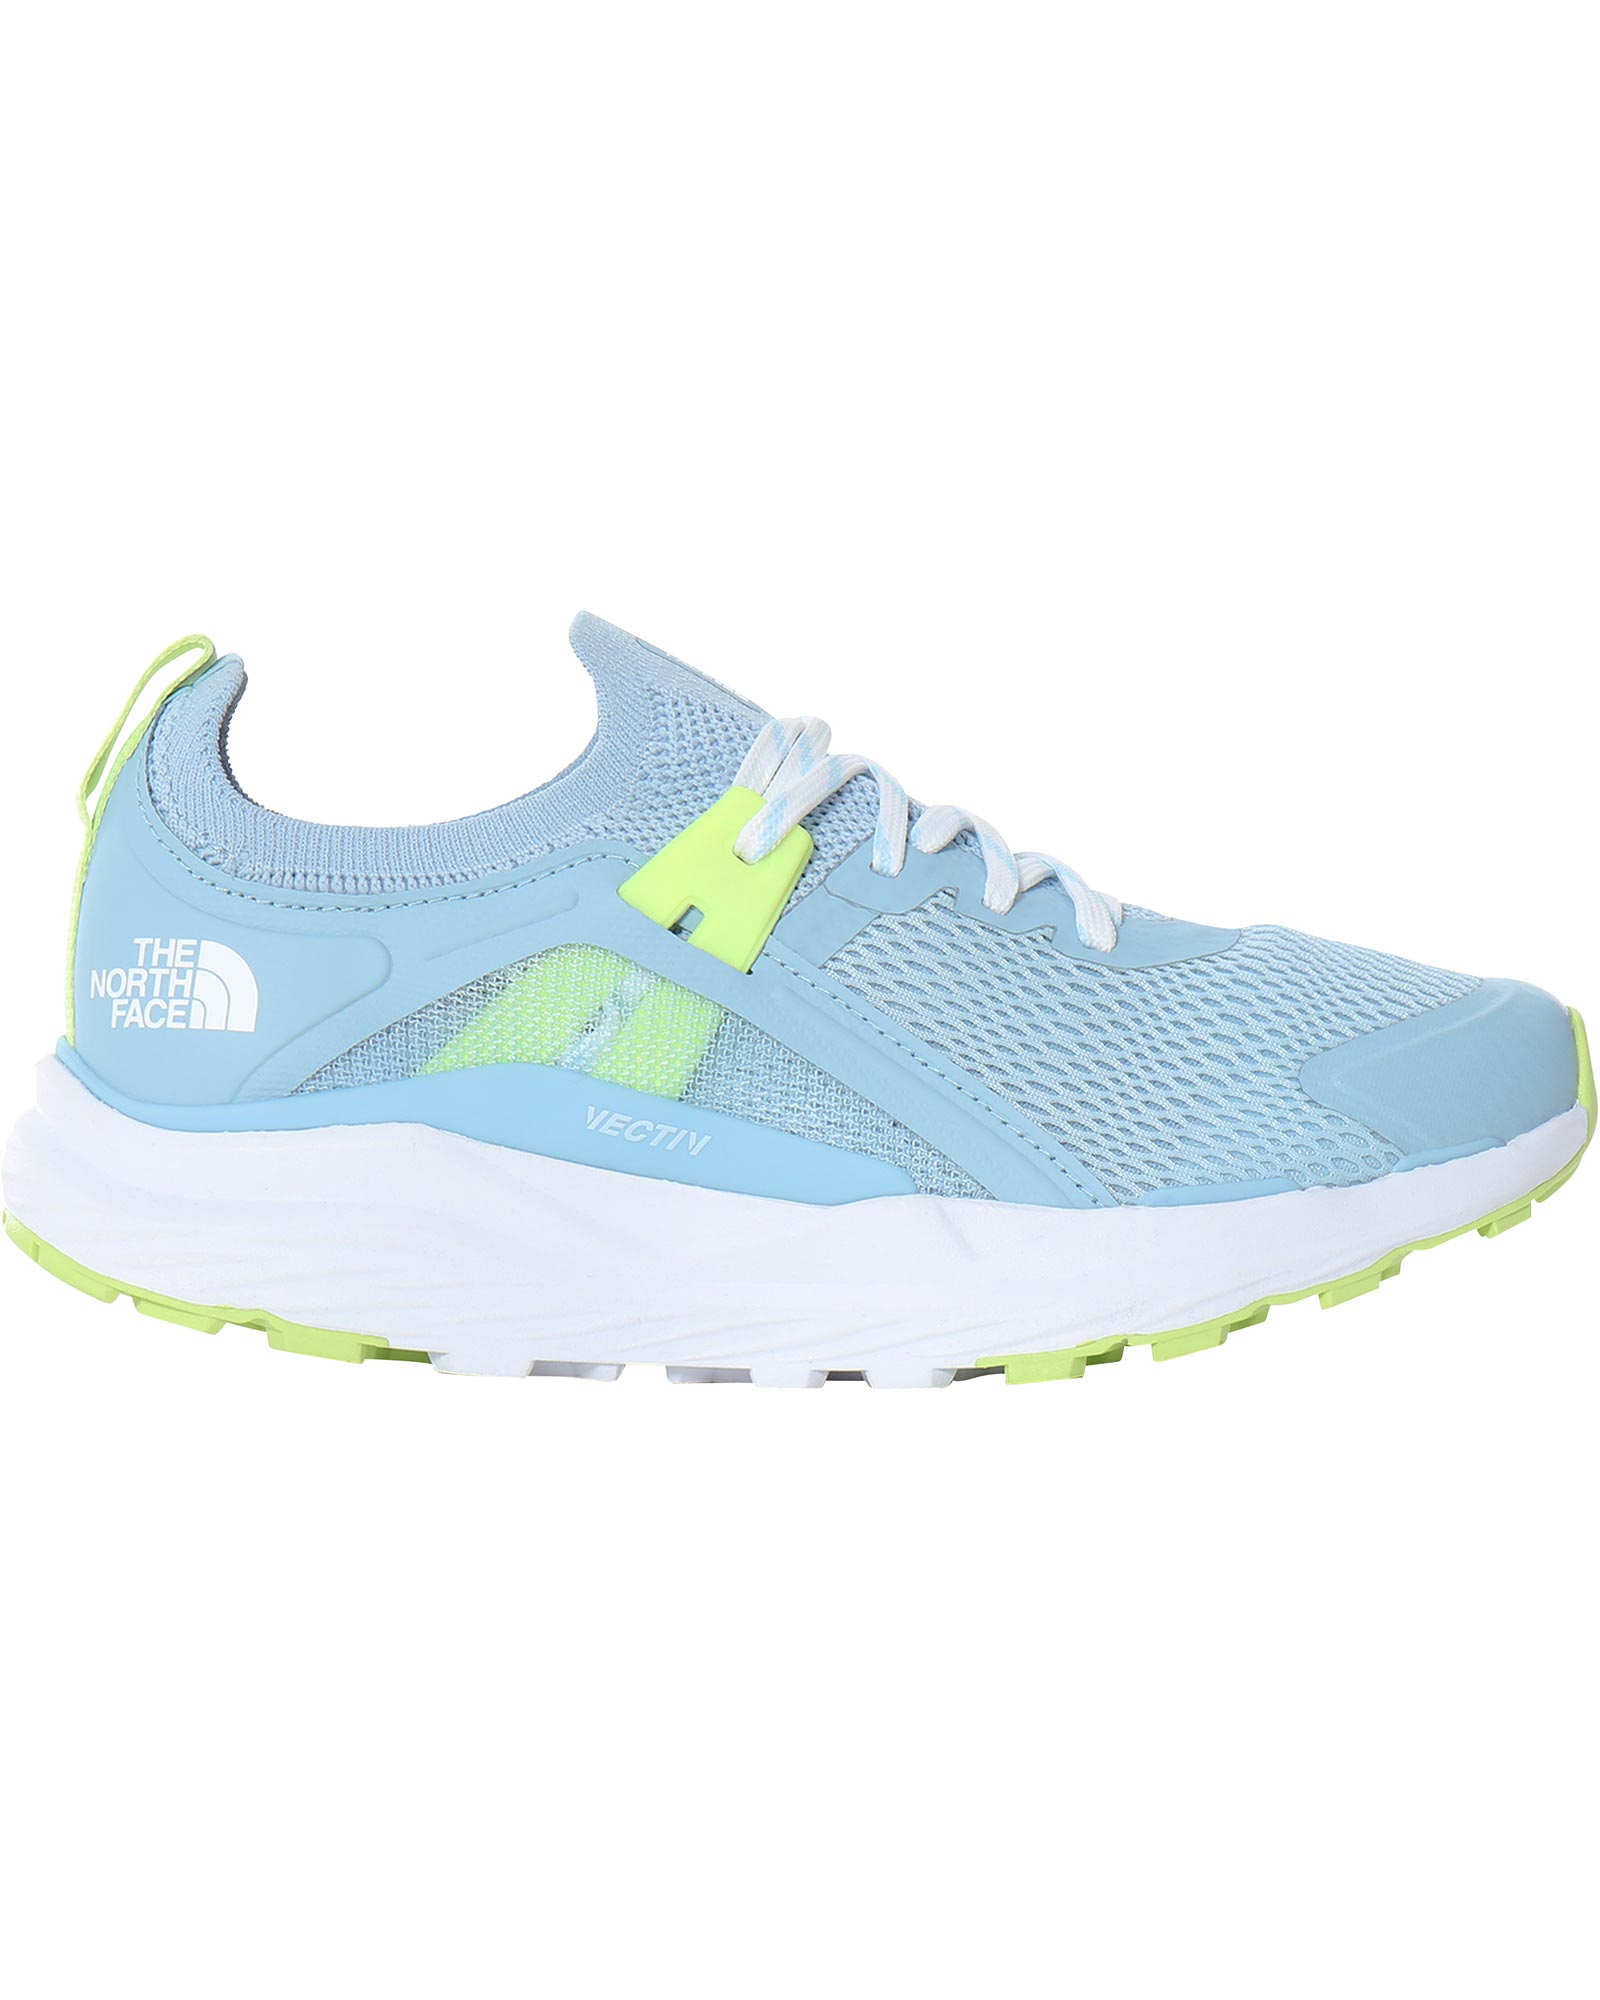 Product image of The North Face Vectiv Hypnum Women's Shoes